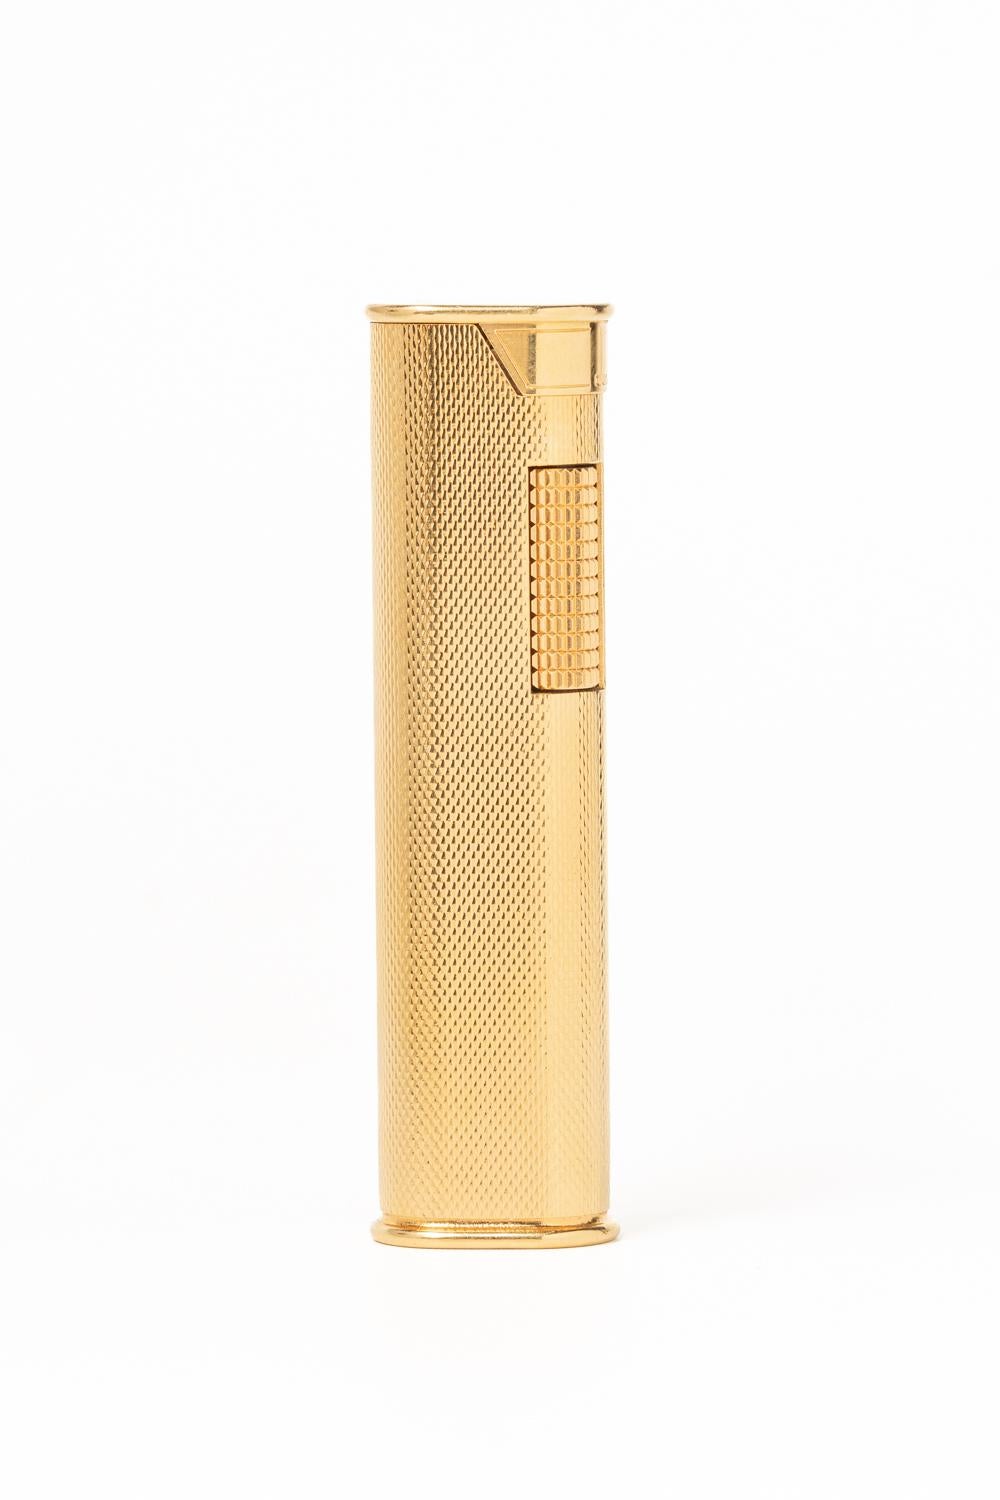 Very rare and elegant vintage Dunhill gold plated 'Slim' lighter This lighter was made in 1960's to 1970's as an evening lighter. Fit perfectly inside your jacket and it's great to handle. Stamped on the bottom. Great gift for very Dunhill's